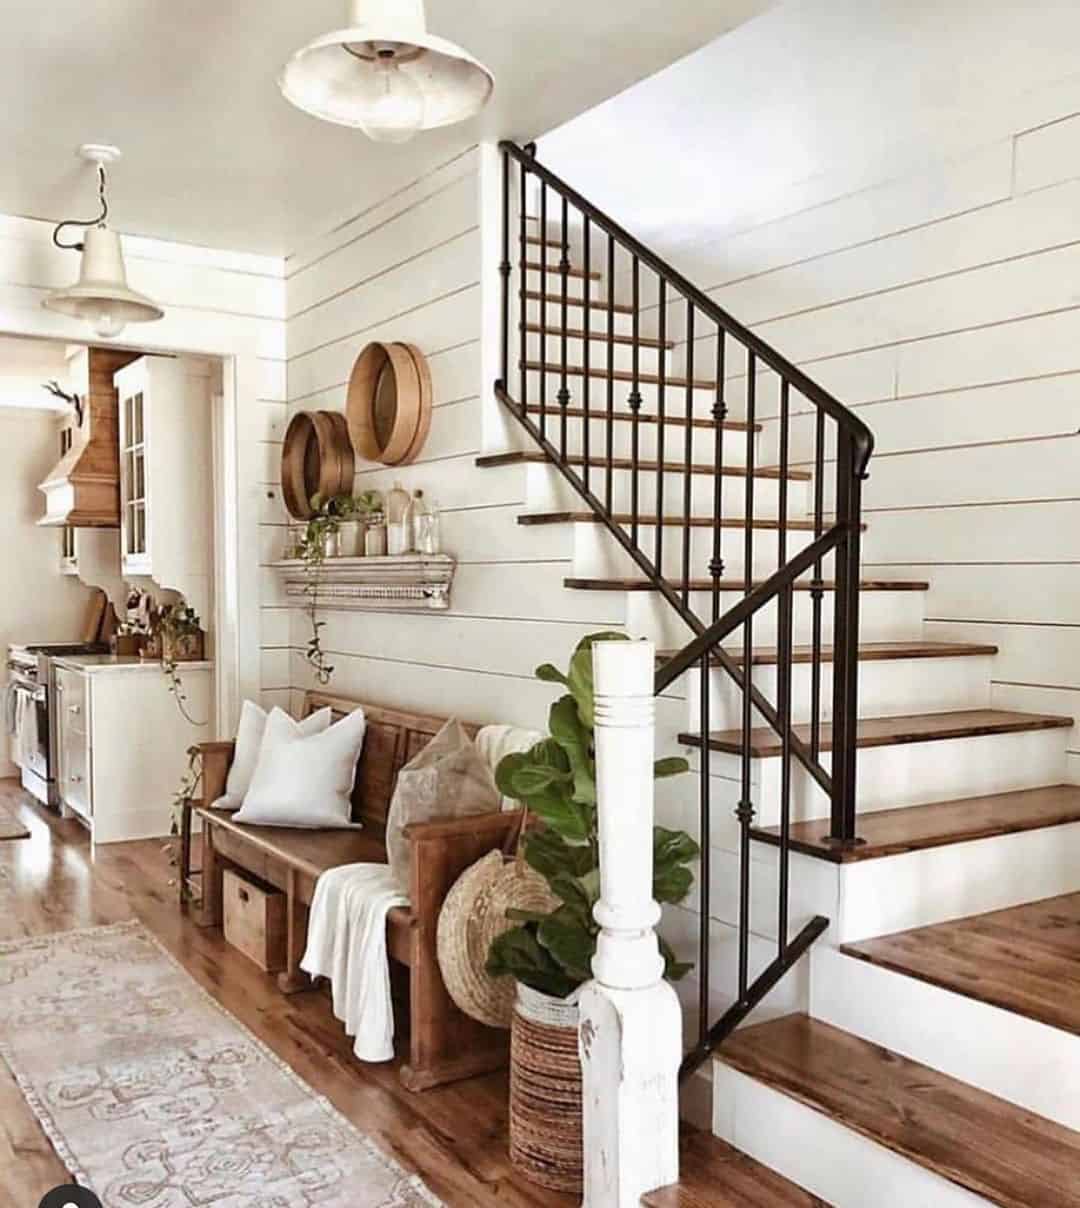 Dezign Lover Home Decoration Blog | The Most Beautiful Modern Rustic Decor Ideas You'll Love in 2023